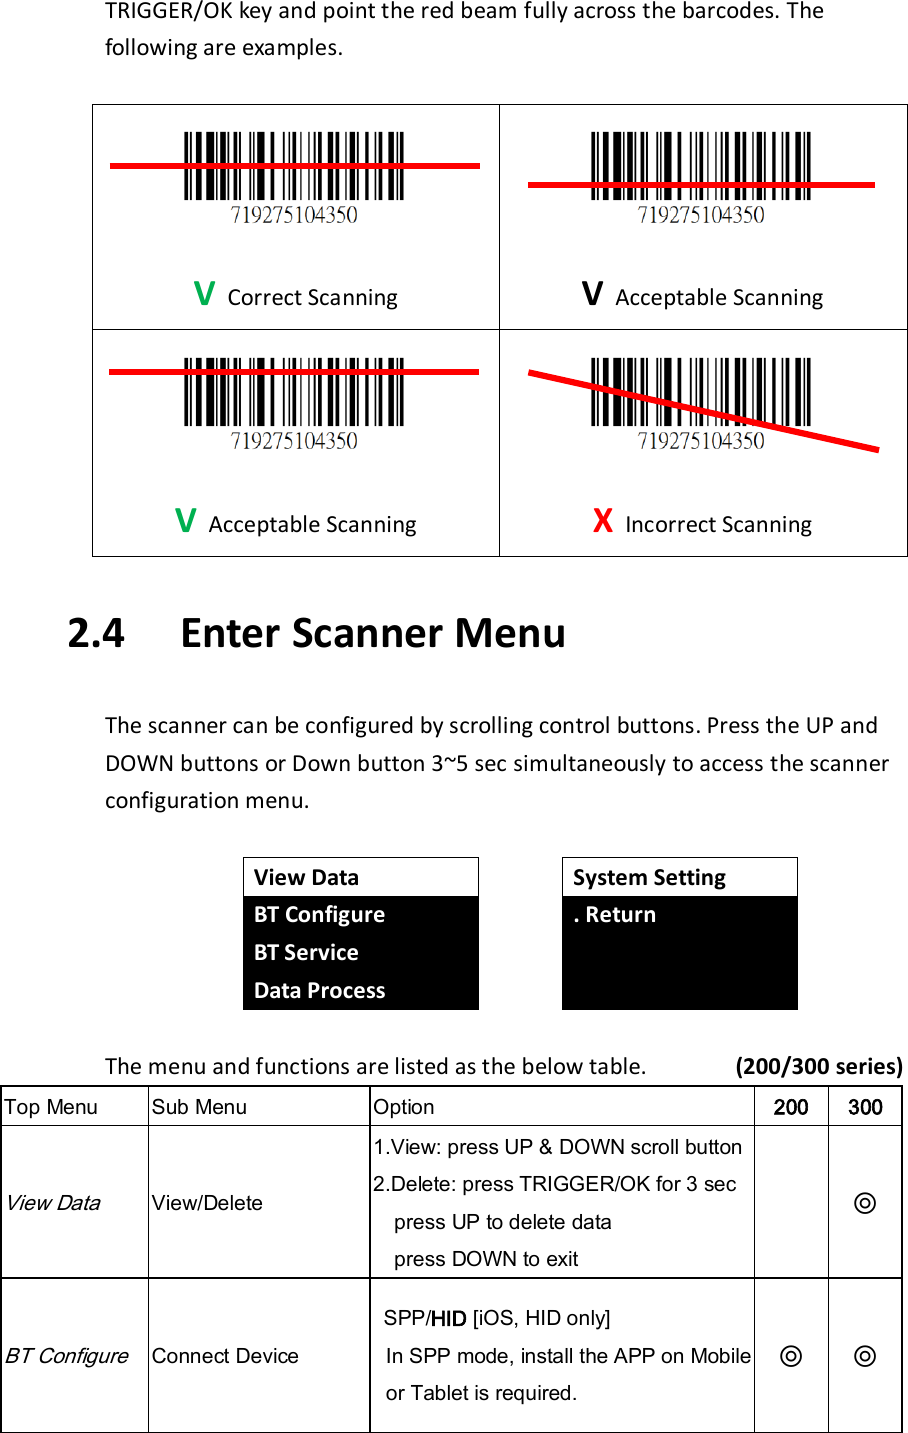 TRIGGER/OK key and point the red beam fully across the barcodes. The following are examples.   V Correct Scanning  V Acceptable Scanning  V Acceptable Scanning  X Incorrect Scanning  2.4   Enter Scanner Menu  The scanner can be configured by scrolling control buttons. Press the UP and DOWN buttons or Down button 3~5 sec simultaneously to access the scanner configuration menu.   View Data BT Configure BT Service Data Process  System Setting . Return    The menu and functions are listed as the below table.              (200/300 series) Top Menu Sub Menu Option 200 300 View Data View/Delete 1.View: press UP &amp; DOWN scroll button   2.Delete: press TRIGGER/OK for 3 sec press UP to delete data press DOWN to exit  ◎ BT Configure Connect Device  SPP/HID [iOS, HID only] In SPP mode, install the APP on Mobile or Tablet is required. ◎ ◎ 